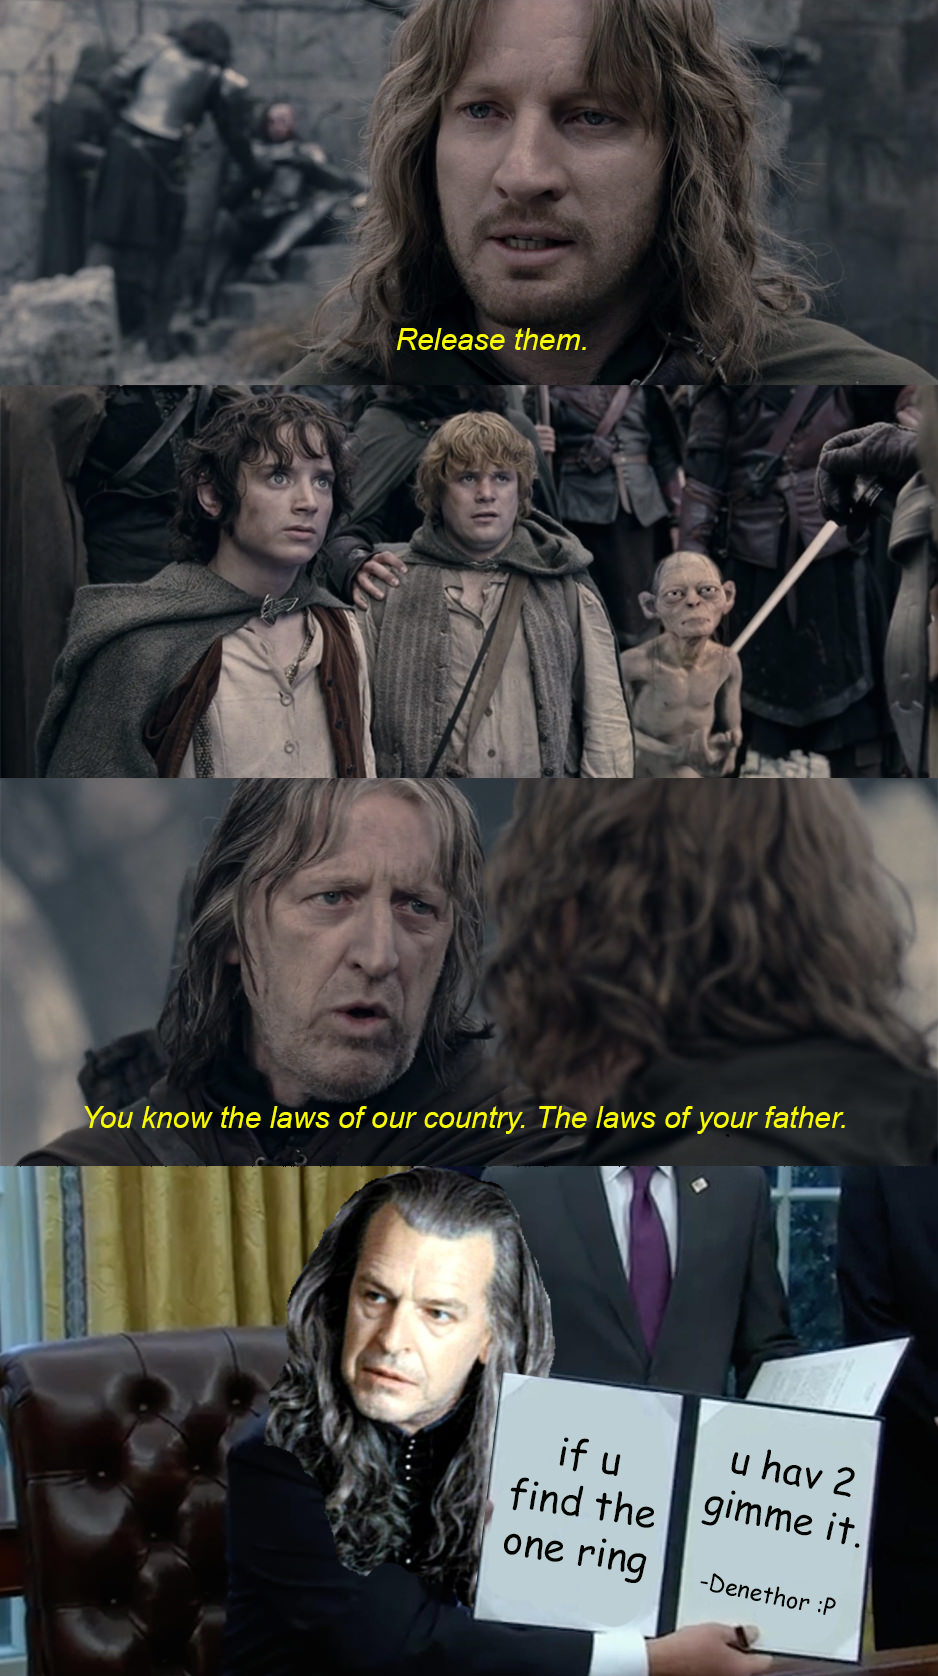 lotr faramir memes - Release them. You know the laws of our country. The laws of your father. if u find the one ring u hav 2 gimme it. Denethor P